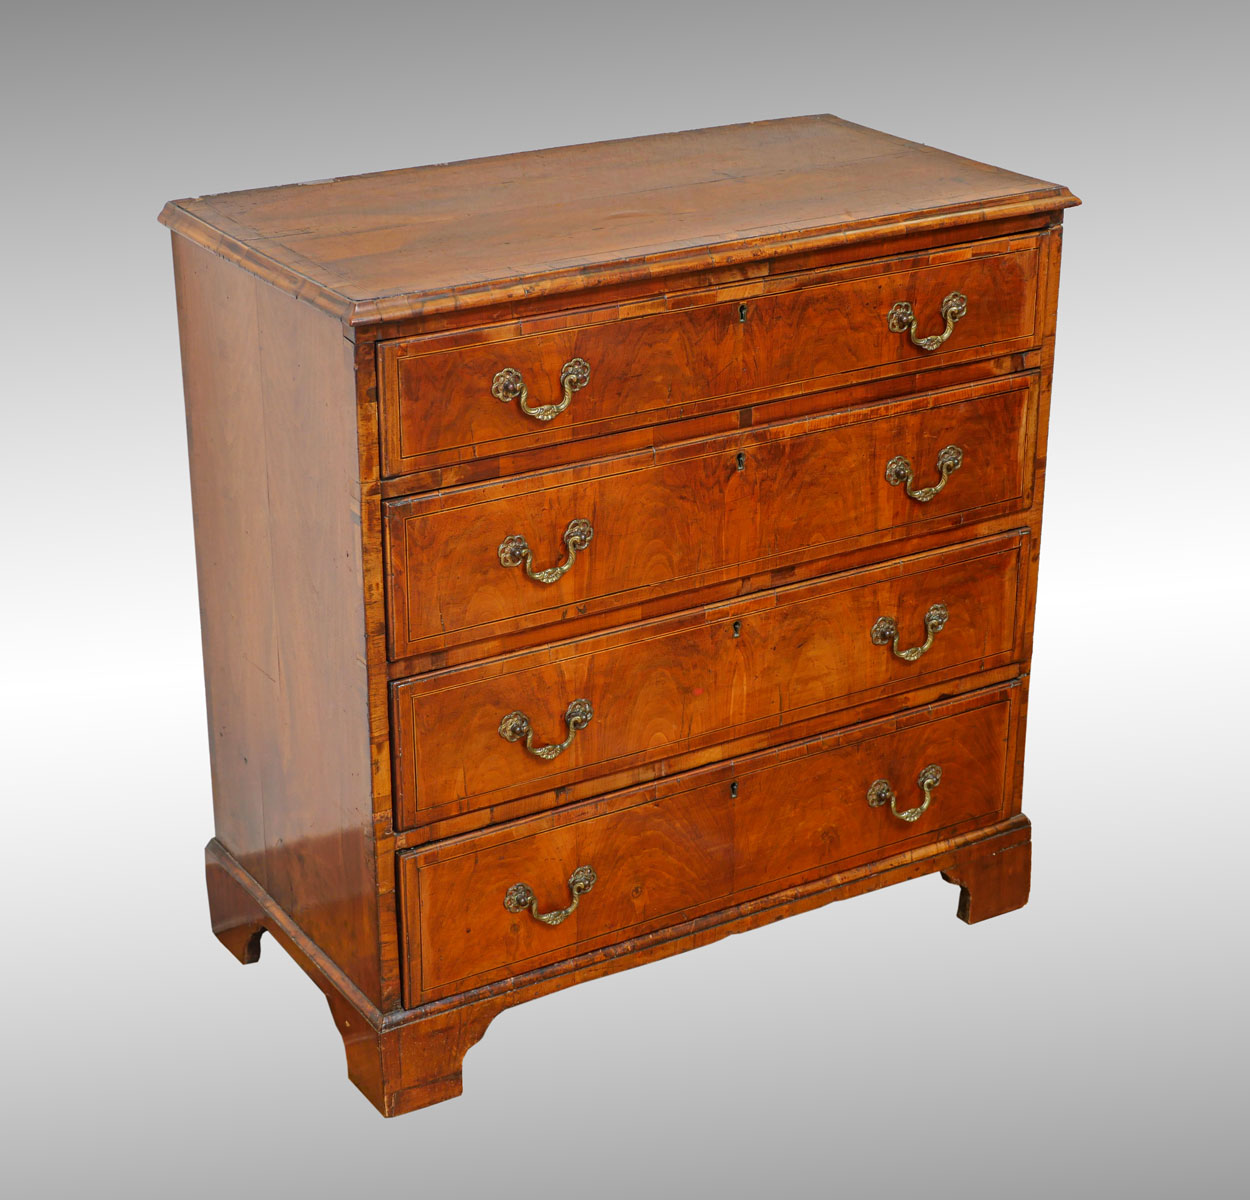 EARLY FOUR DRAWER BANDED CHEST: